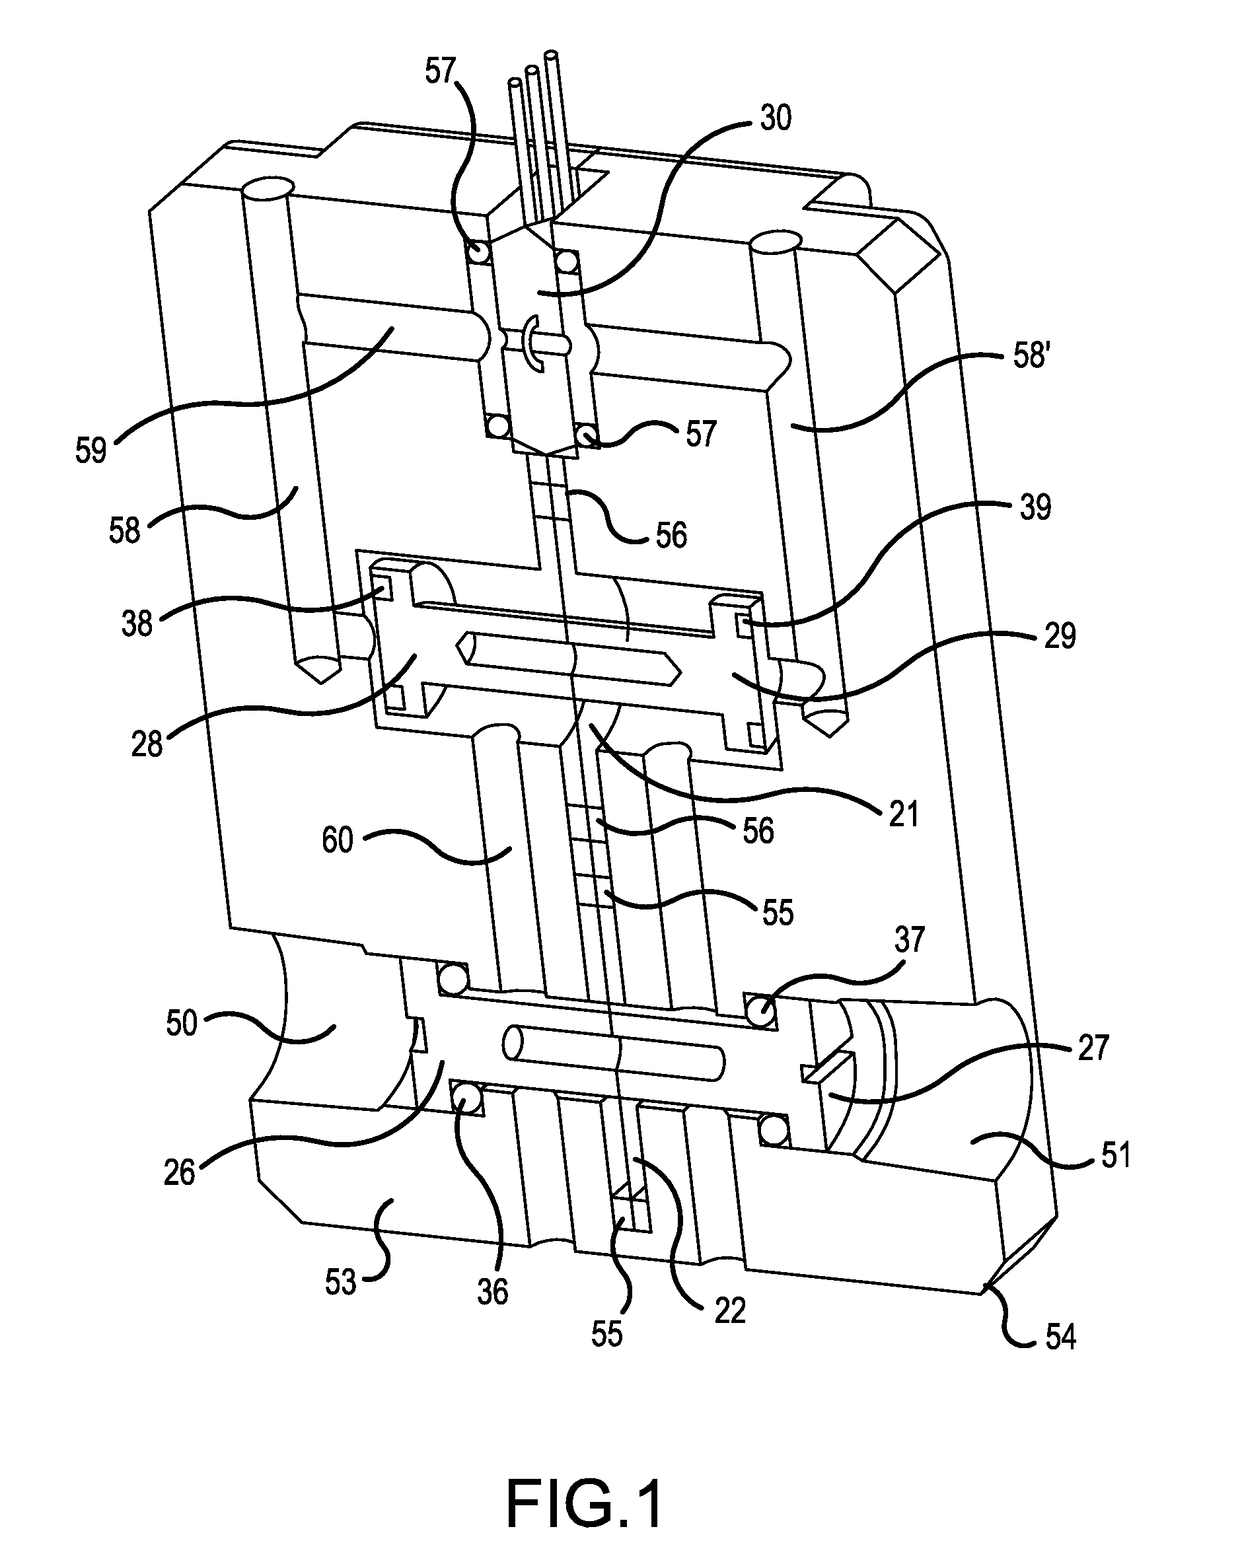 Differential pressure transducer assembly with overload protection